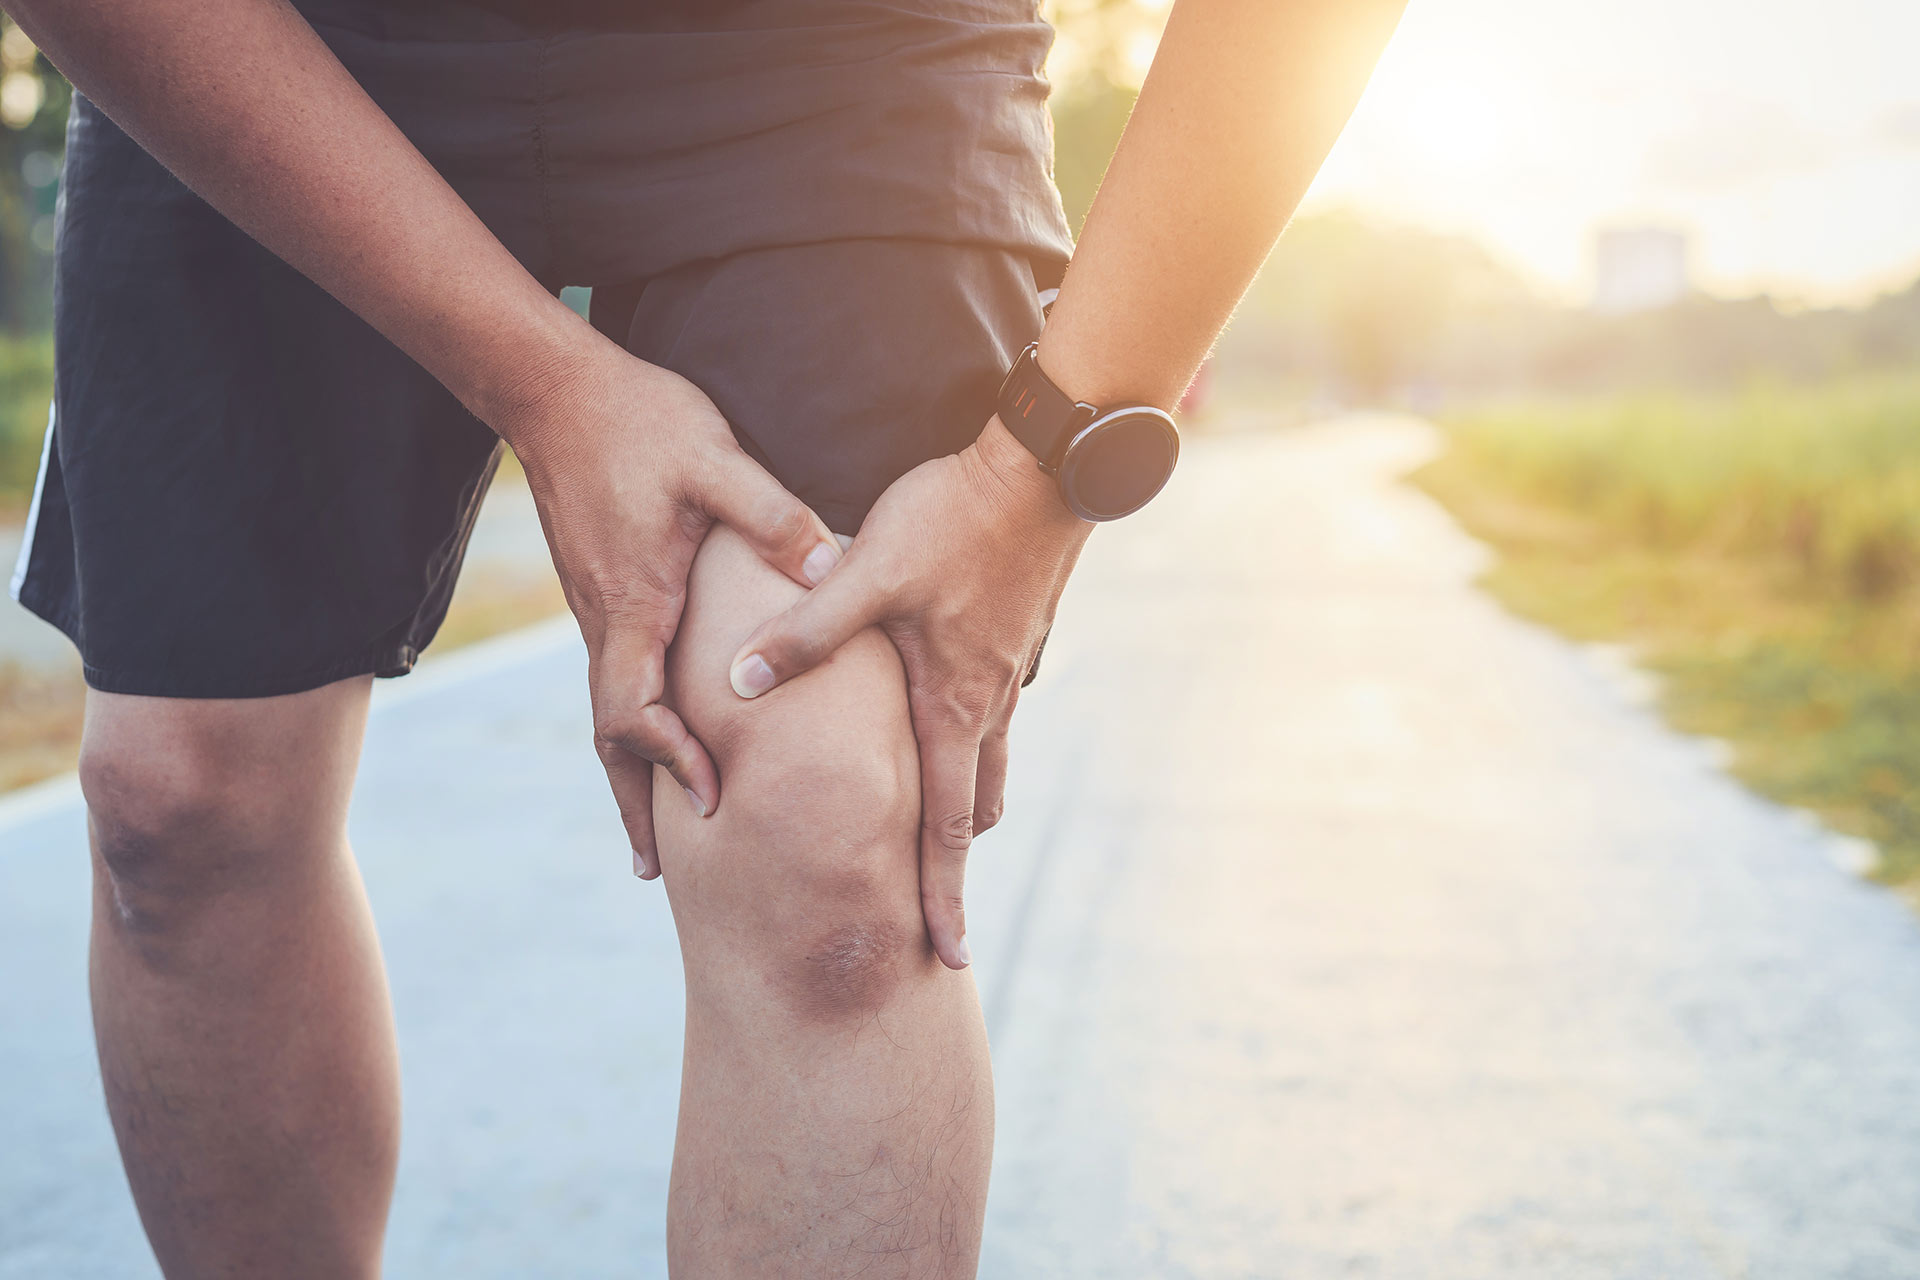 Man holding knee in pain while jogging outdoors